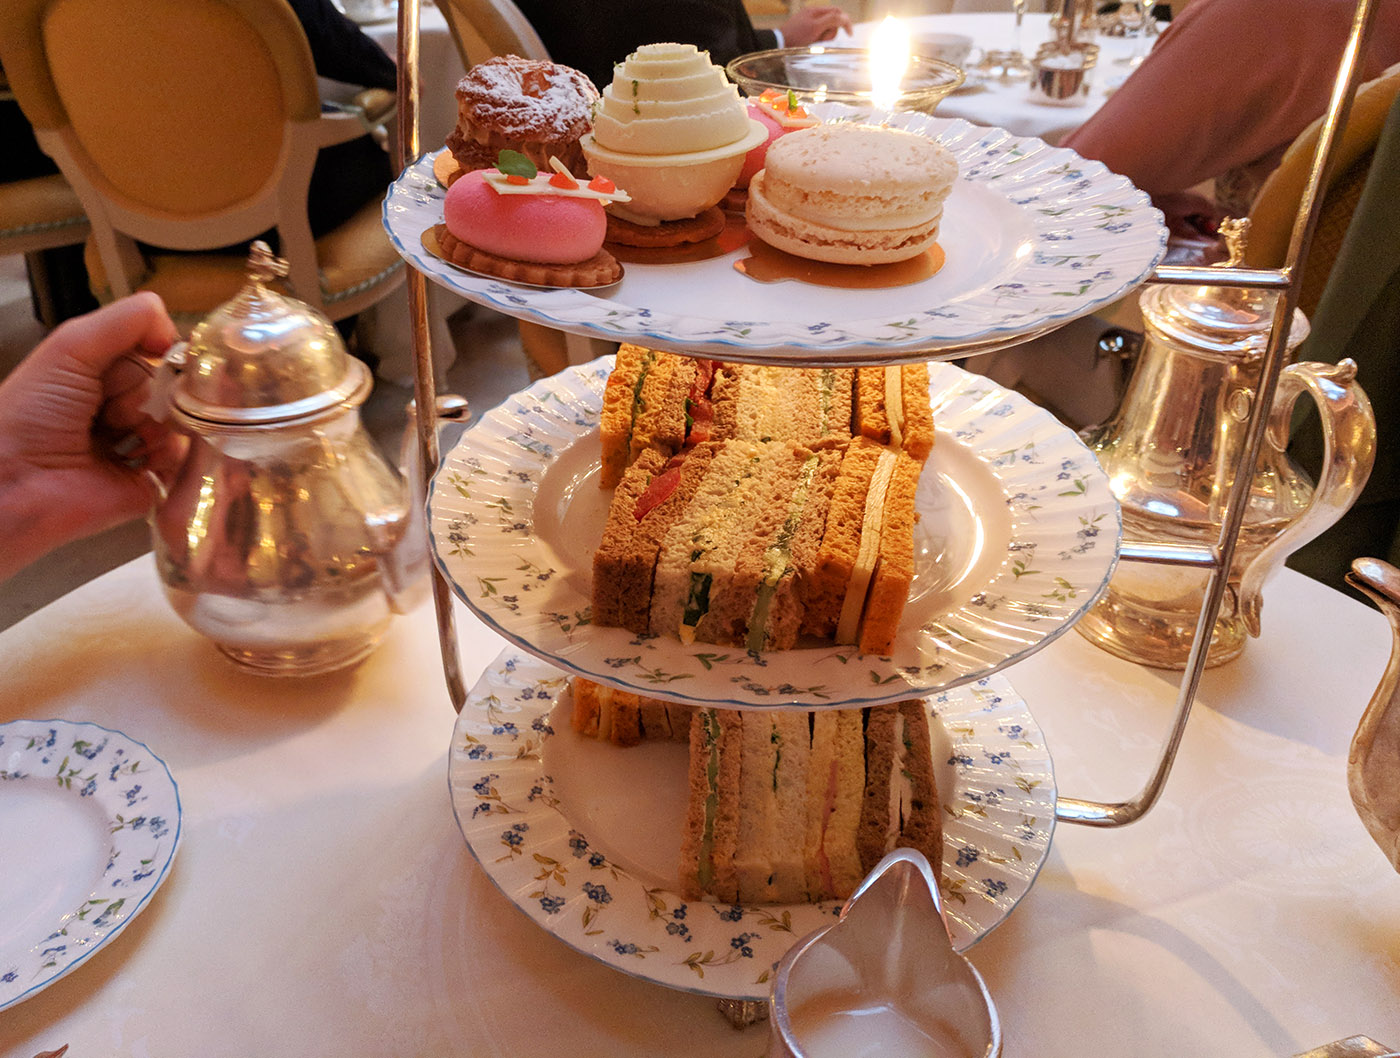 my full review of afternoon tea at The Ritz